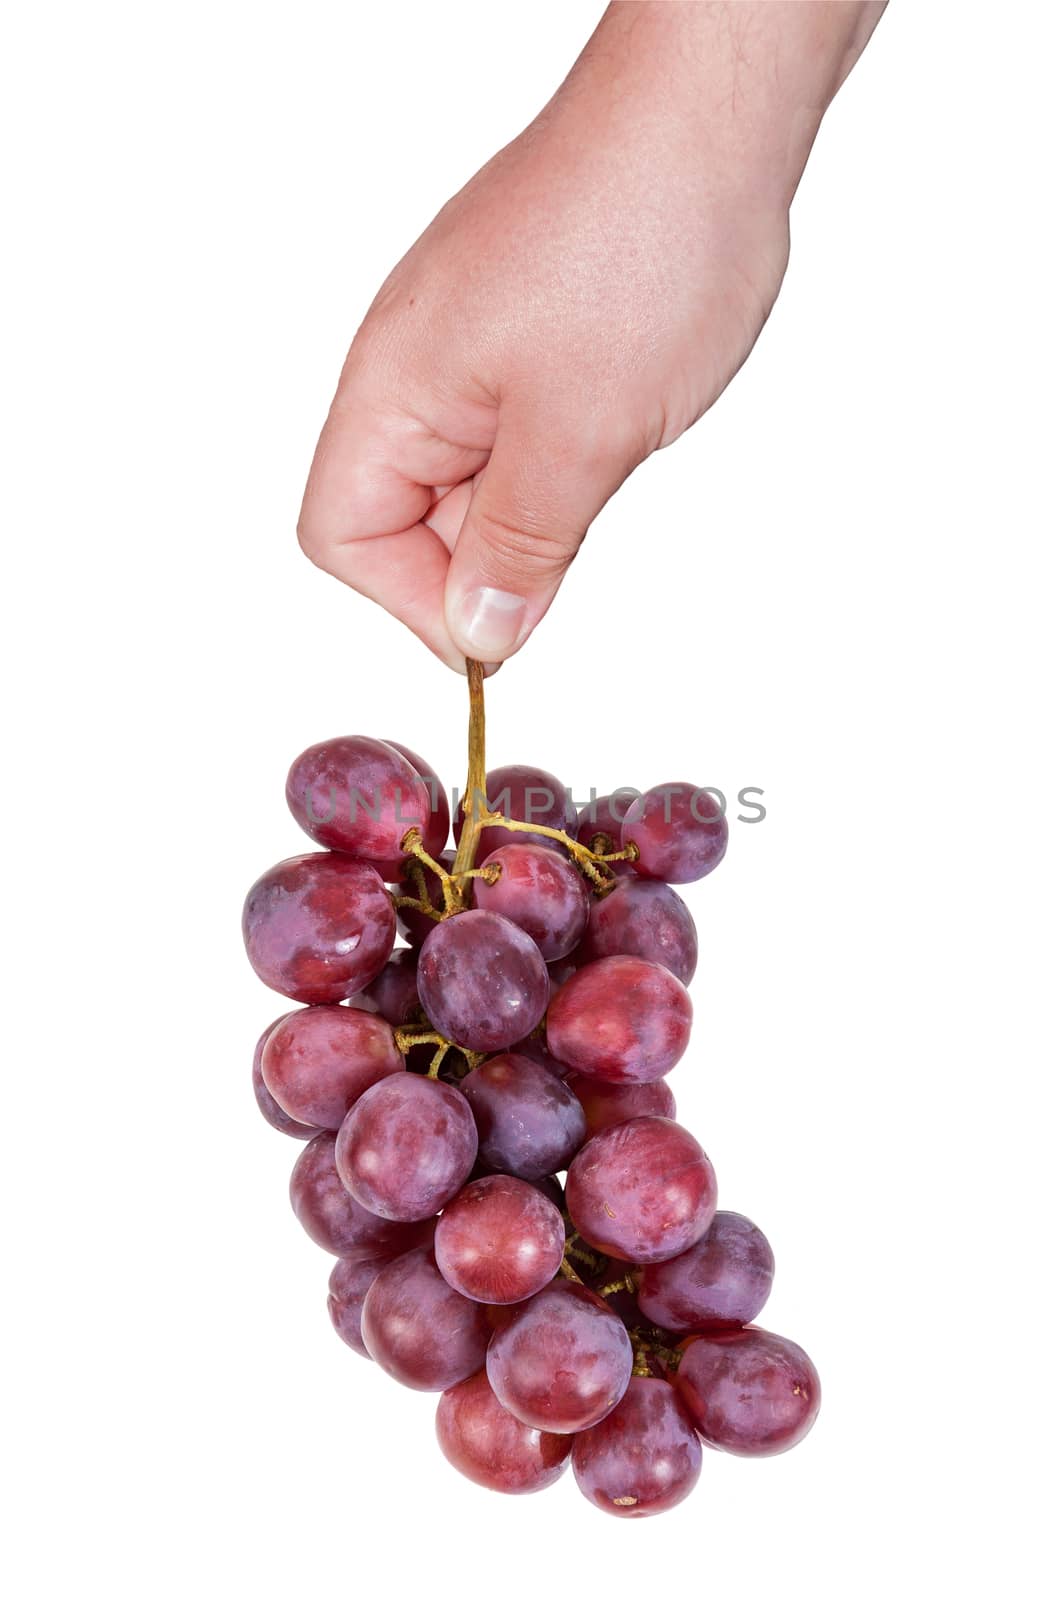 Hand holding bunch of red grapes by mkos83